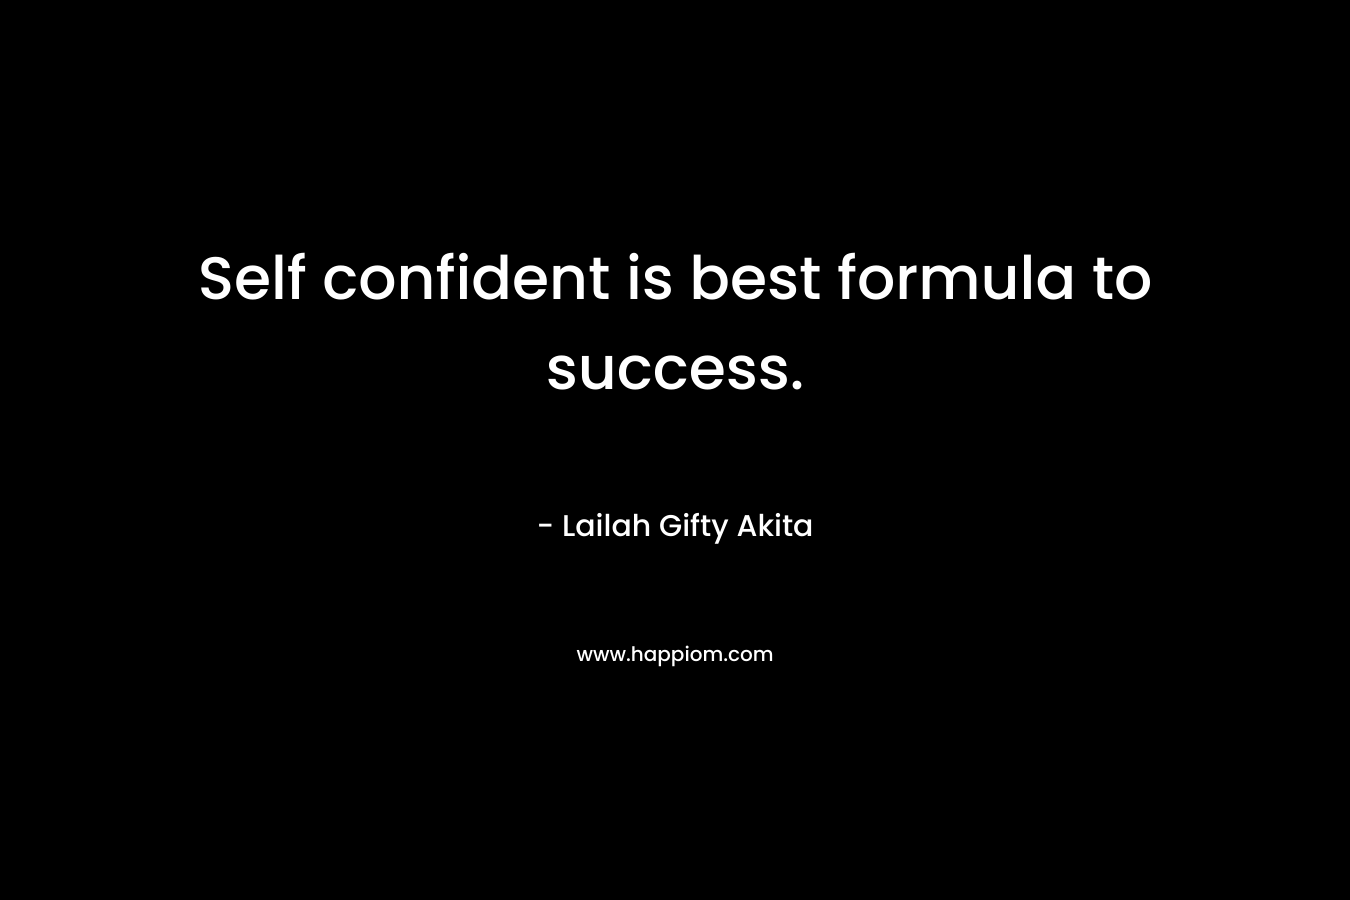 Self confident is best formula to success.